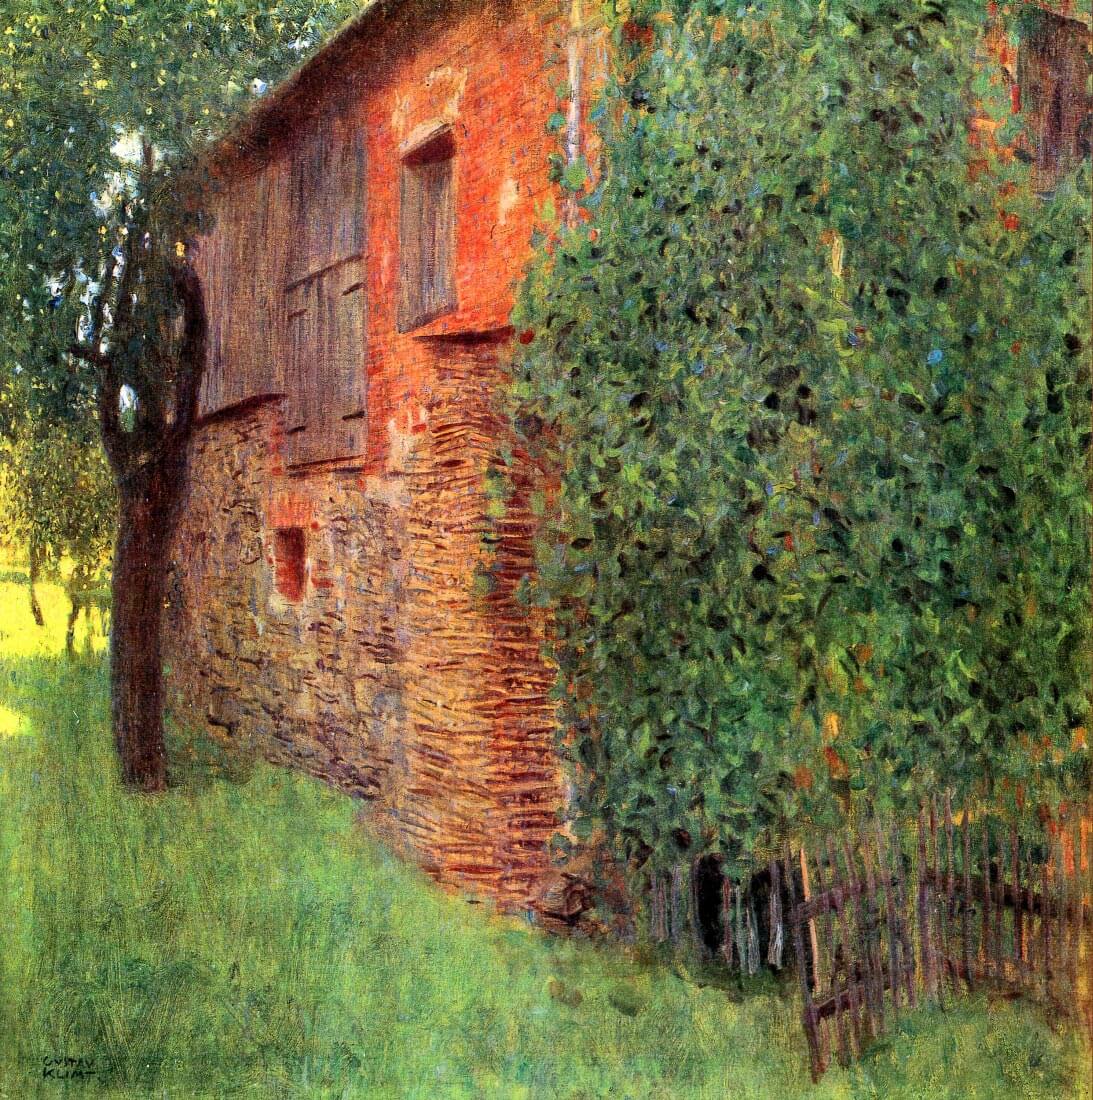 Farmhouse in Chamber in Attersee - Klimt